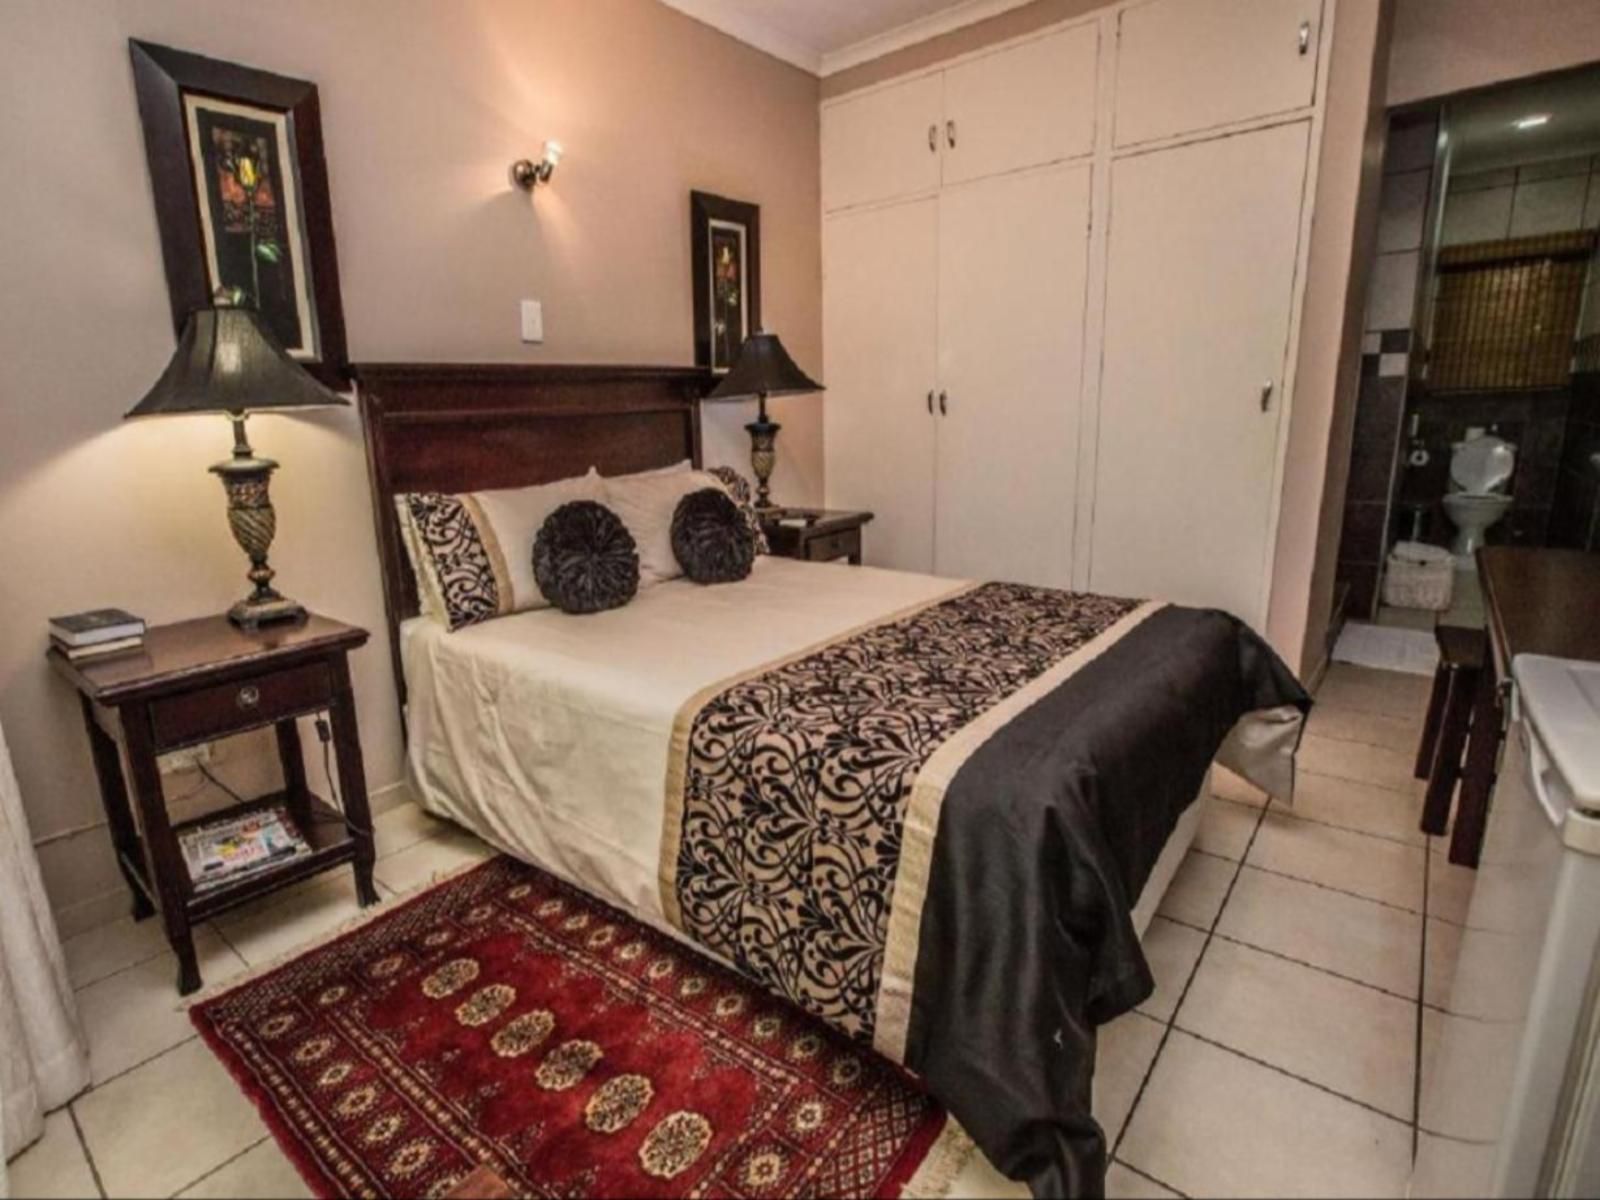 Home Guest House Protea Park Rustenburg North West Province South Africa Bedroom